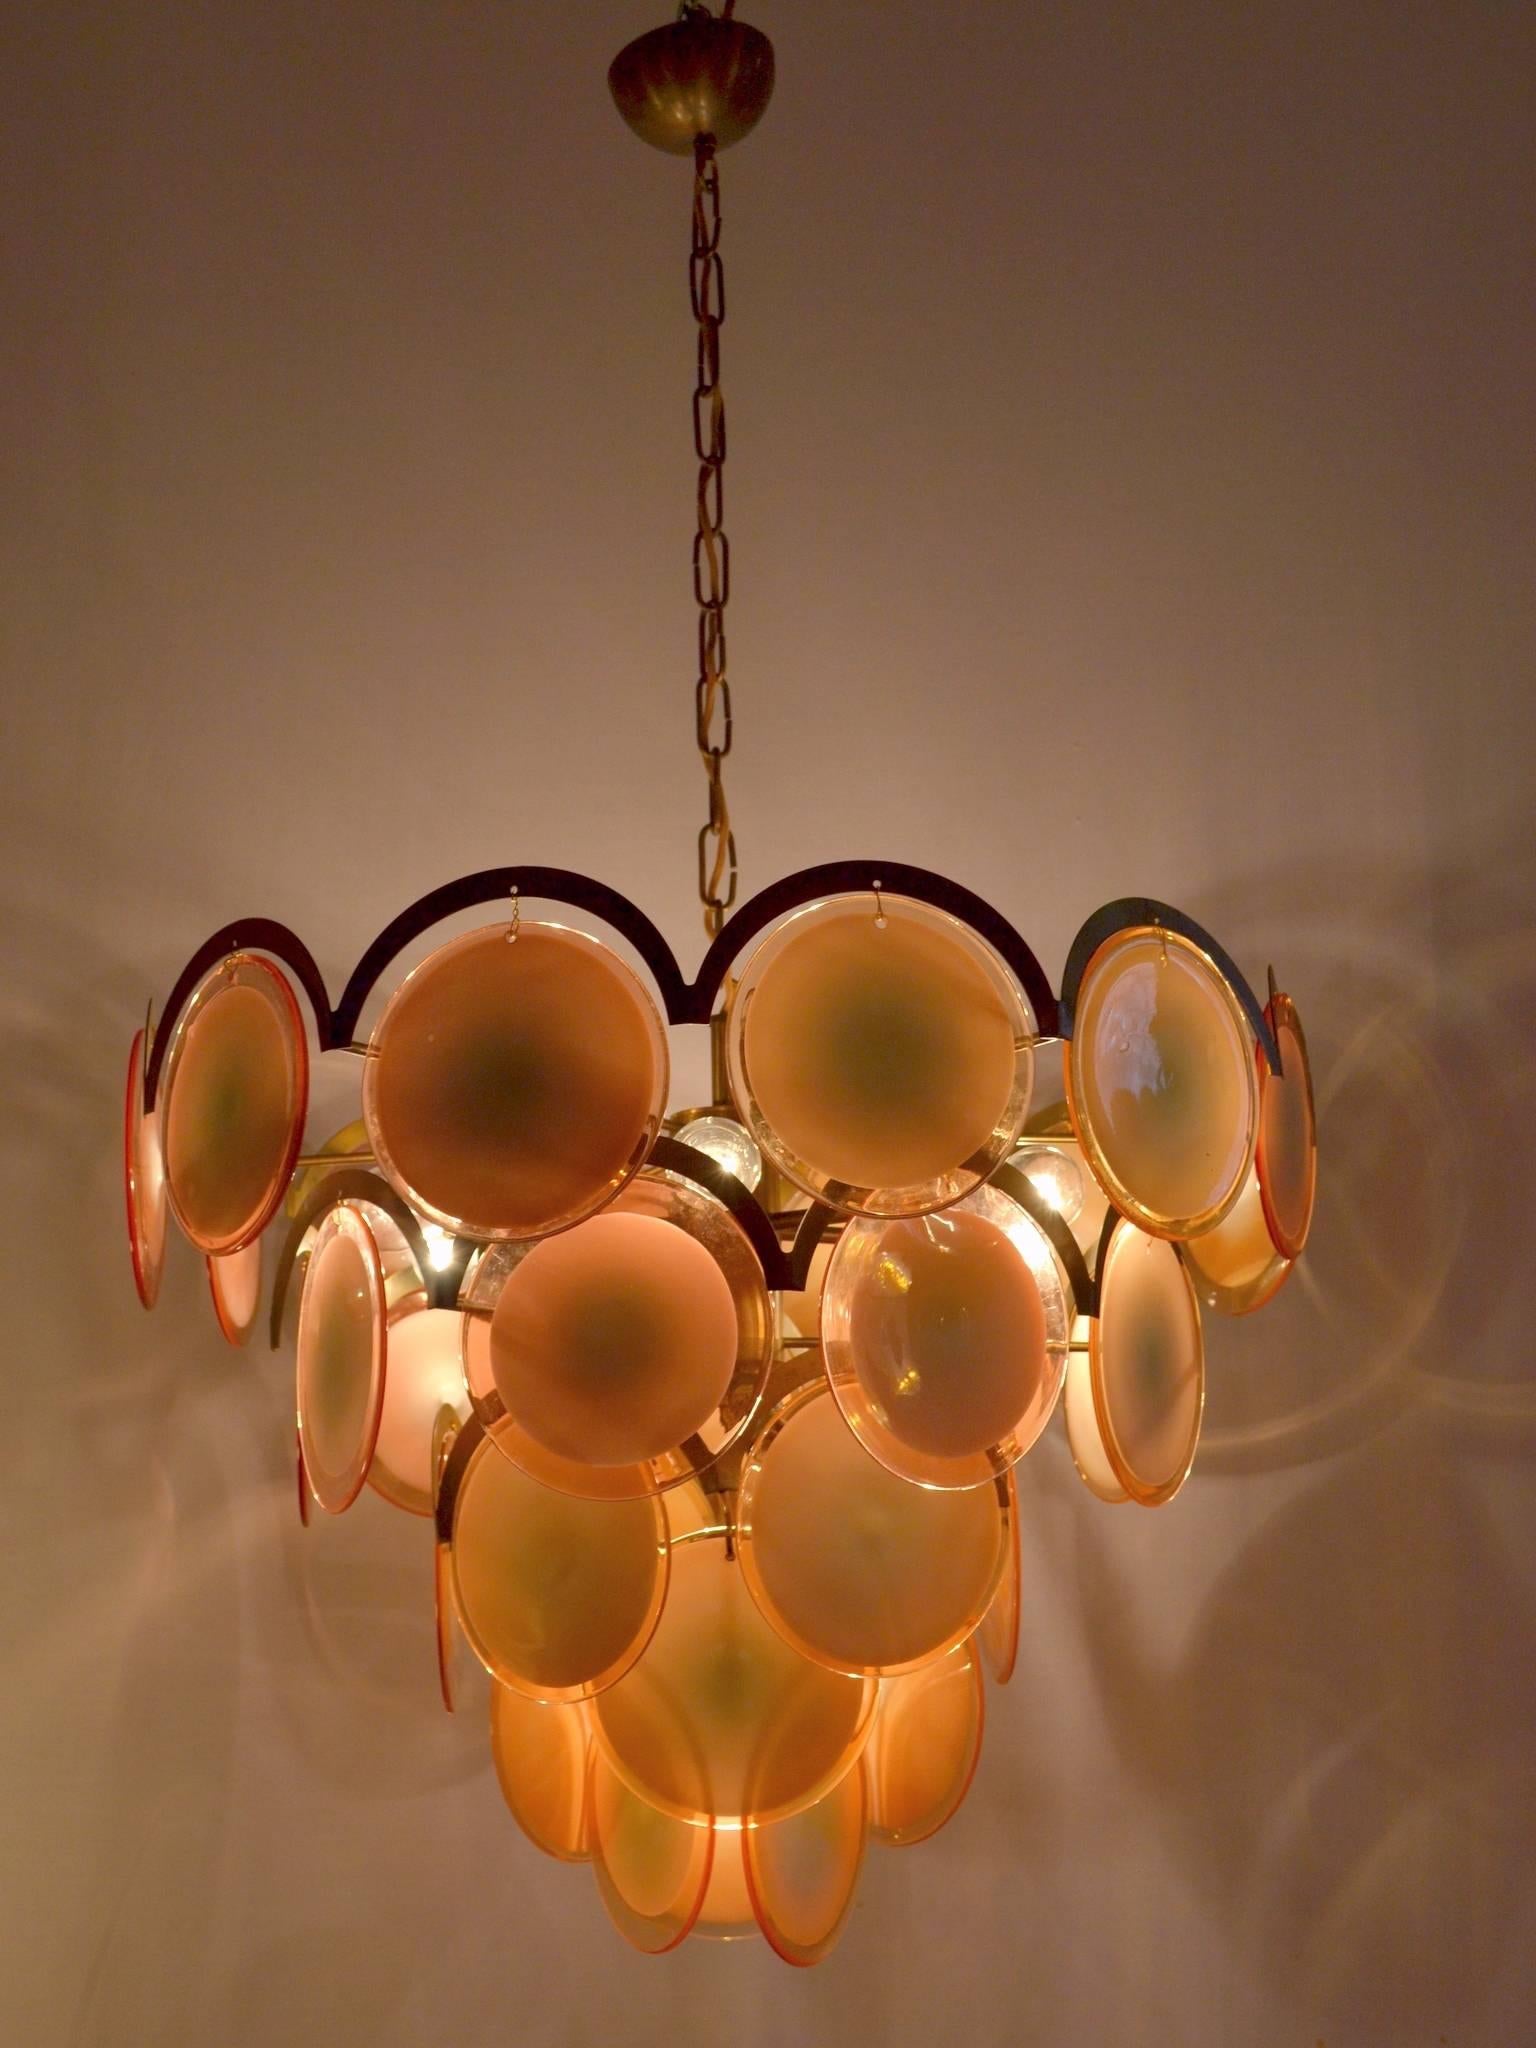 Large disc chandelier by Gino Vistosi with handmade discs in white/amber/rose color set on a brass frame. In total 33 glass discs. Extra discs will be included upon sale. The lamp is 50 cm in height and the chain 60 cm. The length of the chain can